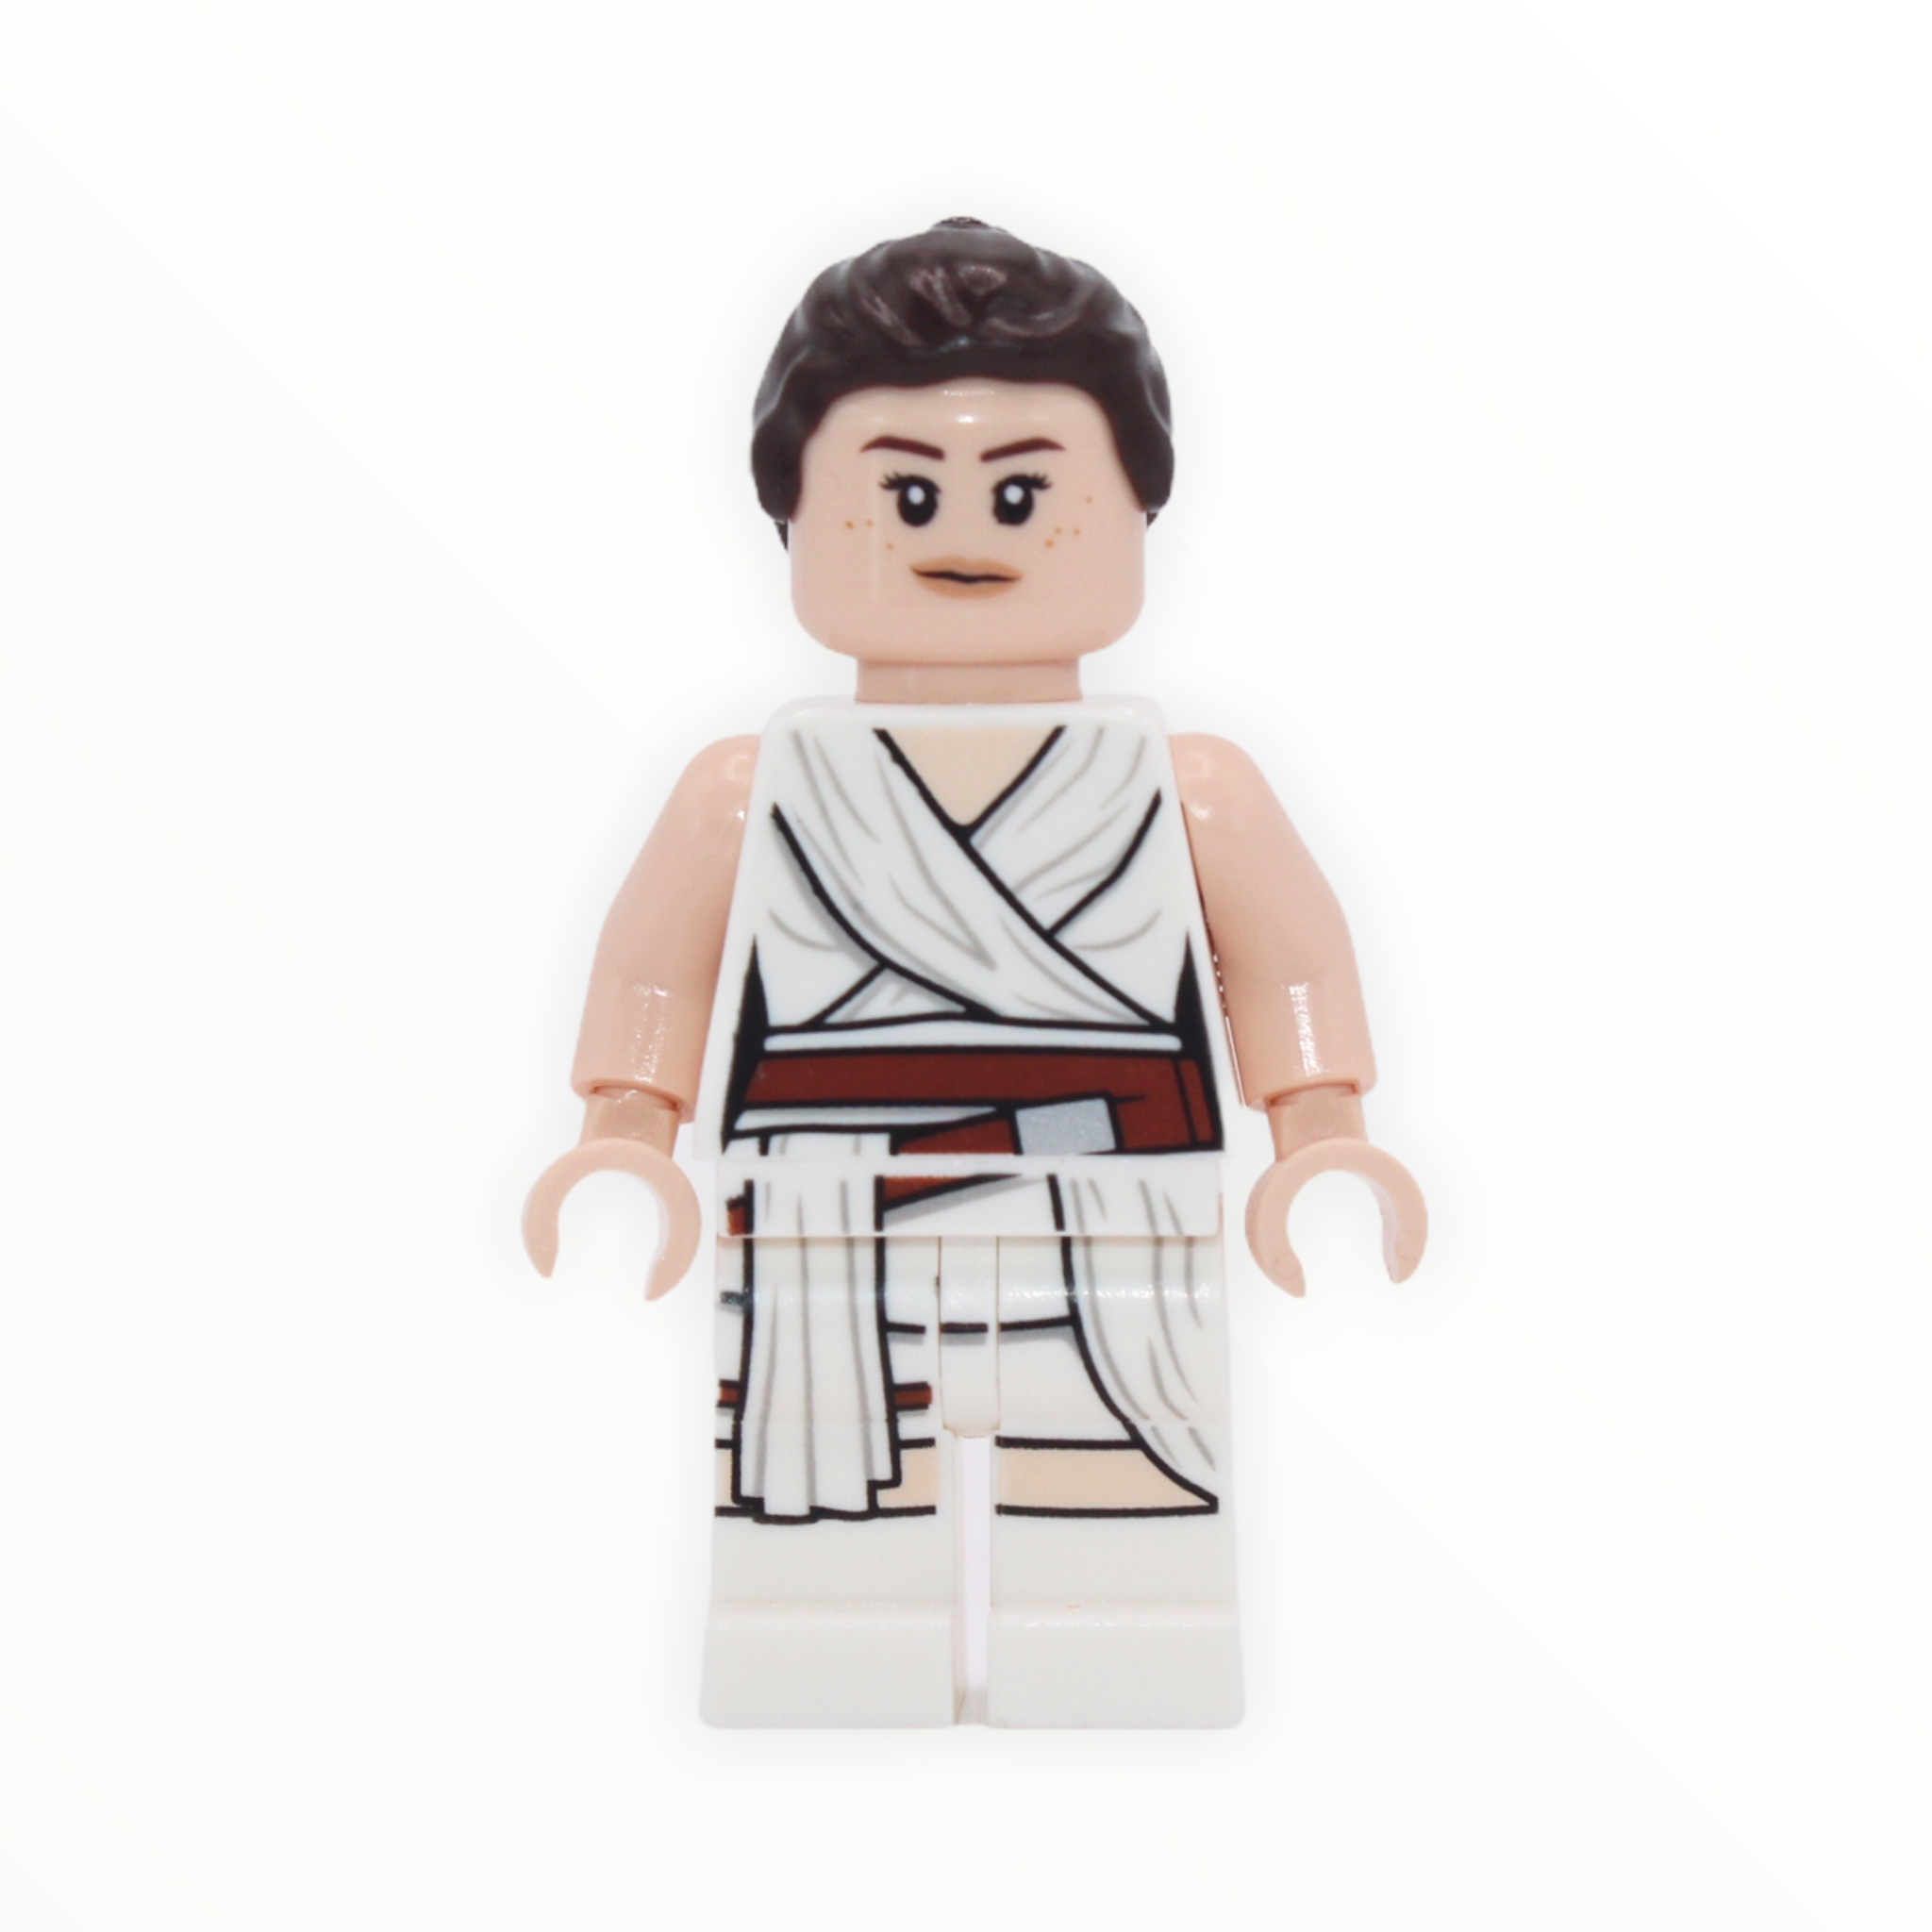 Rey (white tied robe, The Rise of Skywalker)